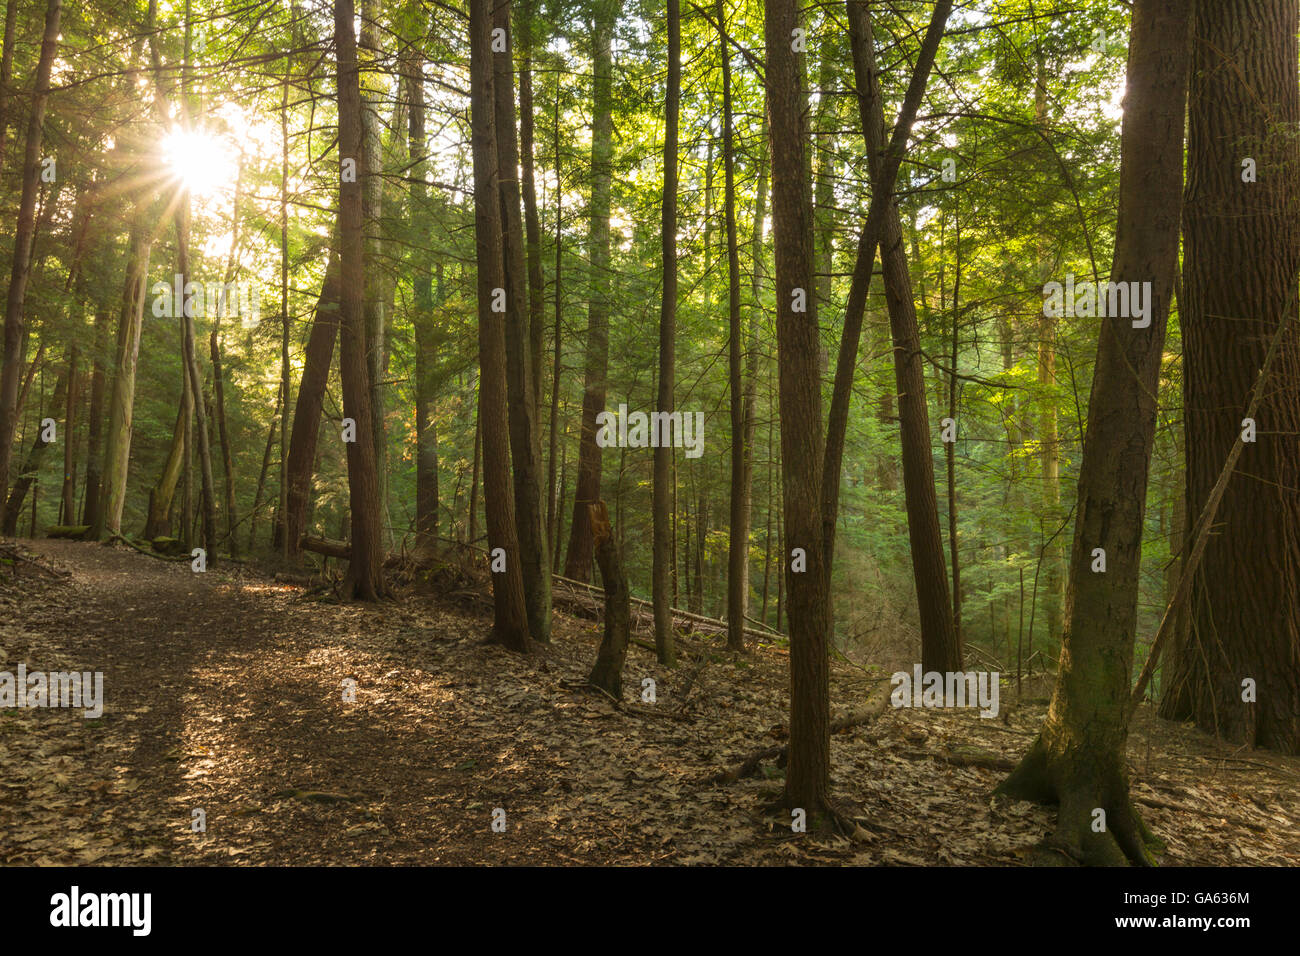 OLD GROWTH WHITE PINE AND HEMLOCK TREES ANCIENT FOREST TRAIL FOREST CATHEDRAL NATIONAL NATURAL LANDMARK COOK FOREST PENNSYLVANIA Stock Photo